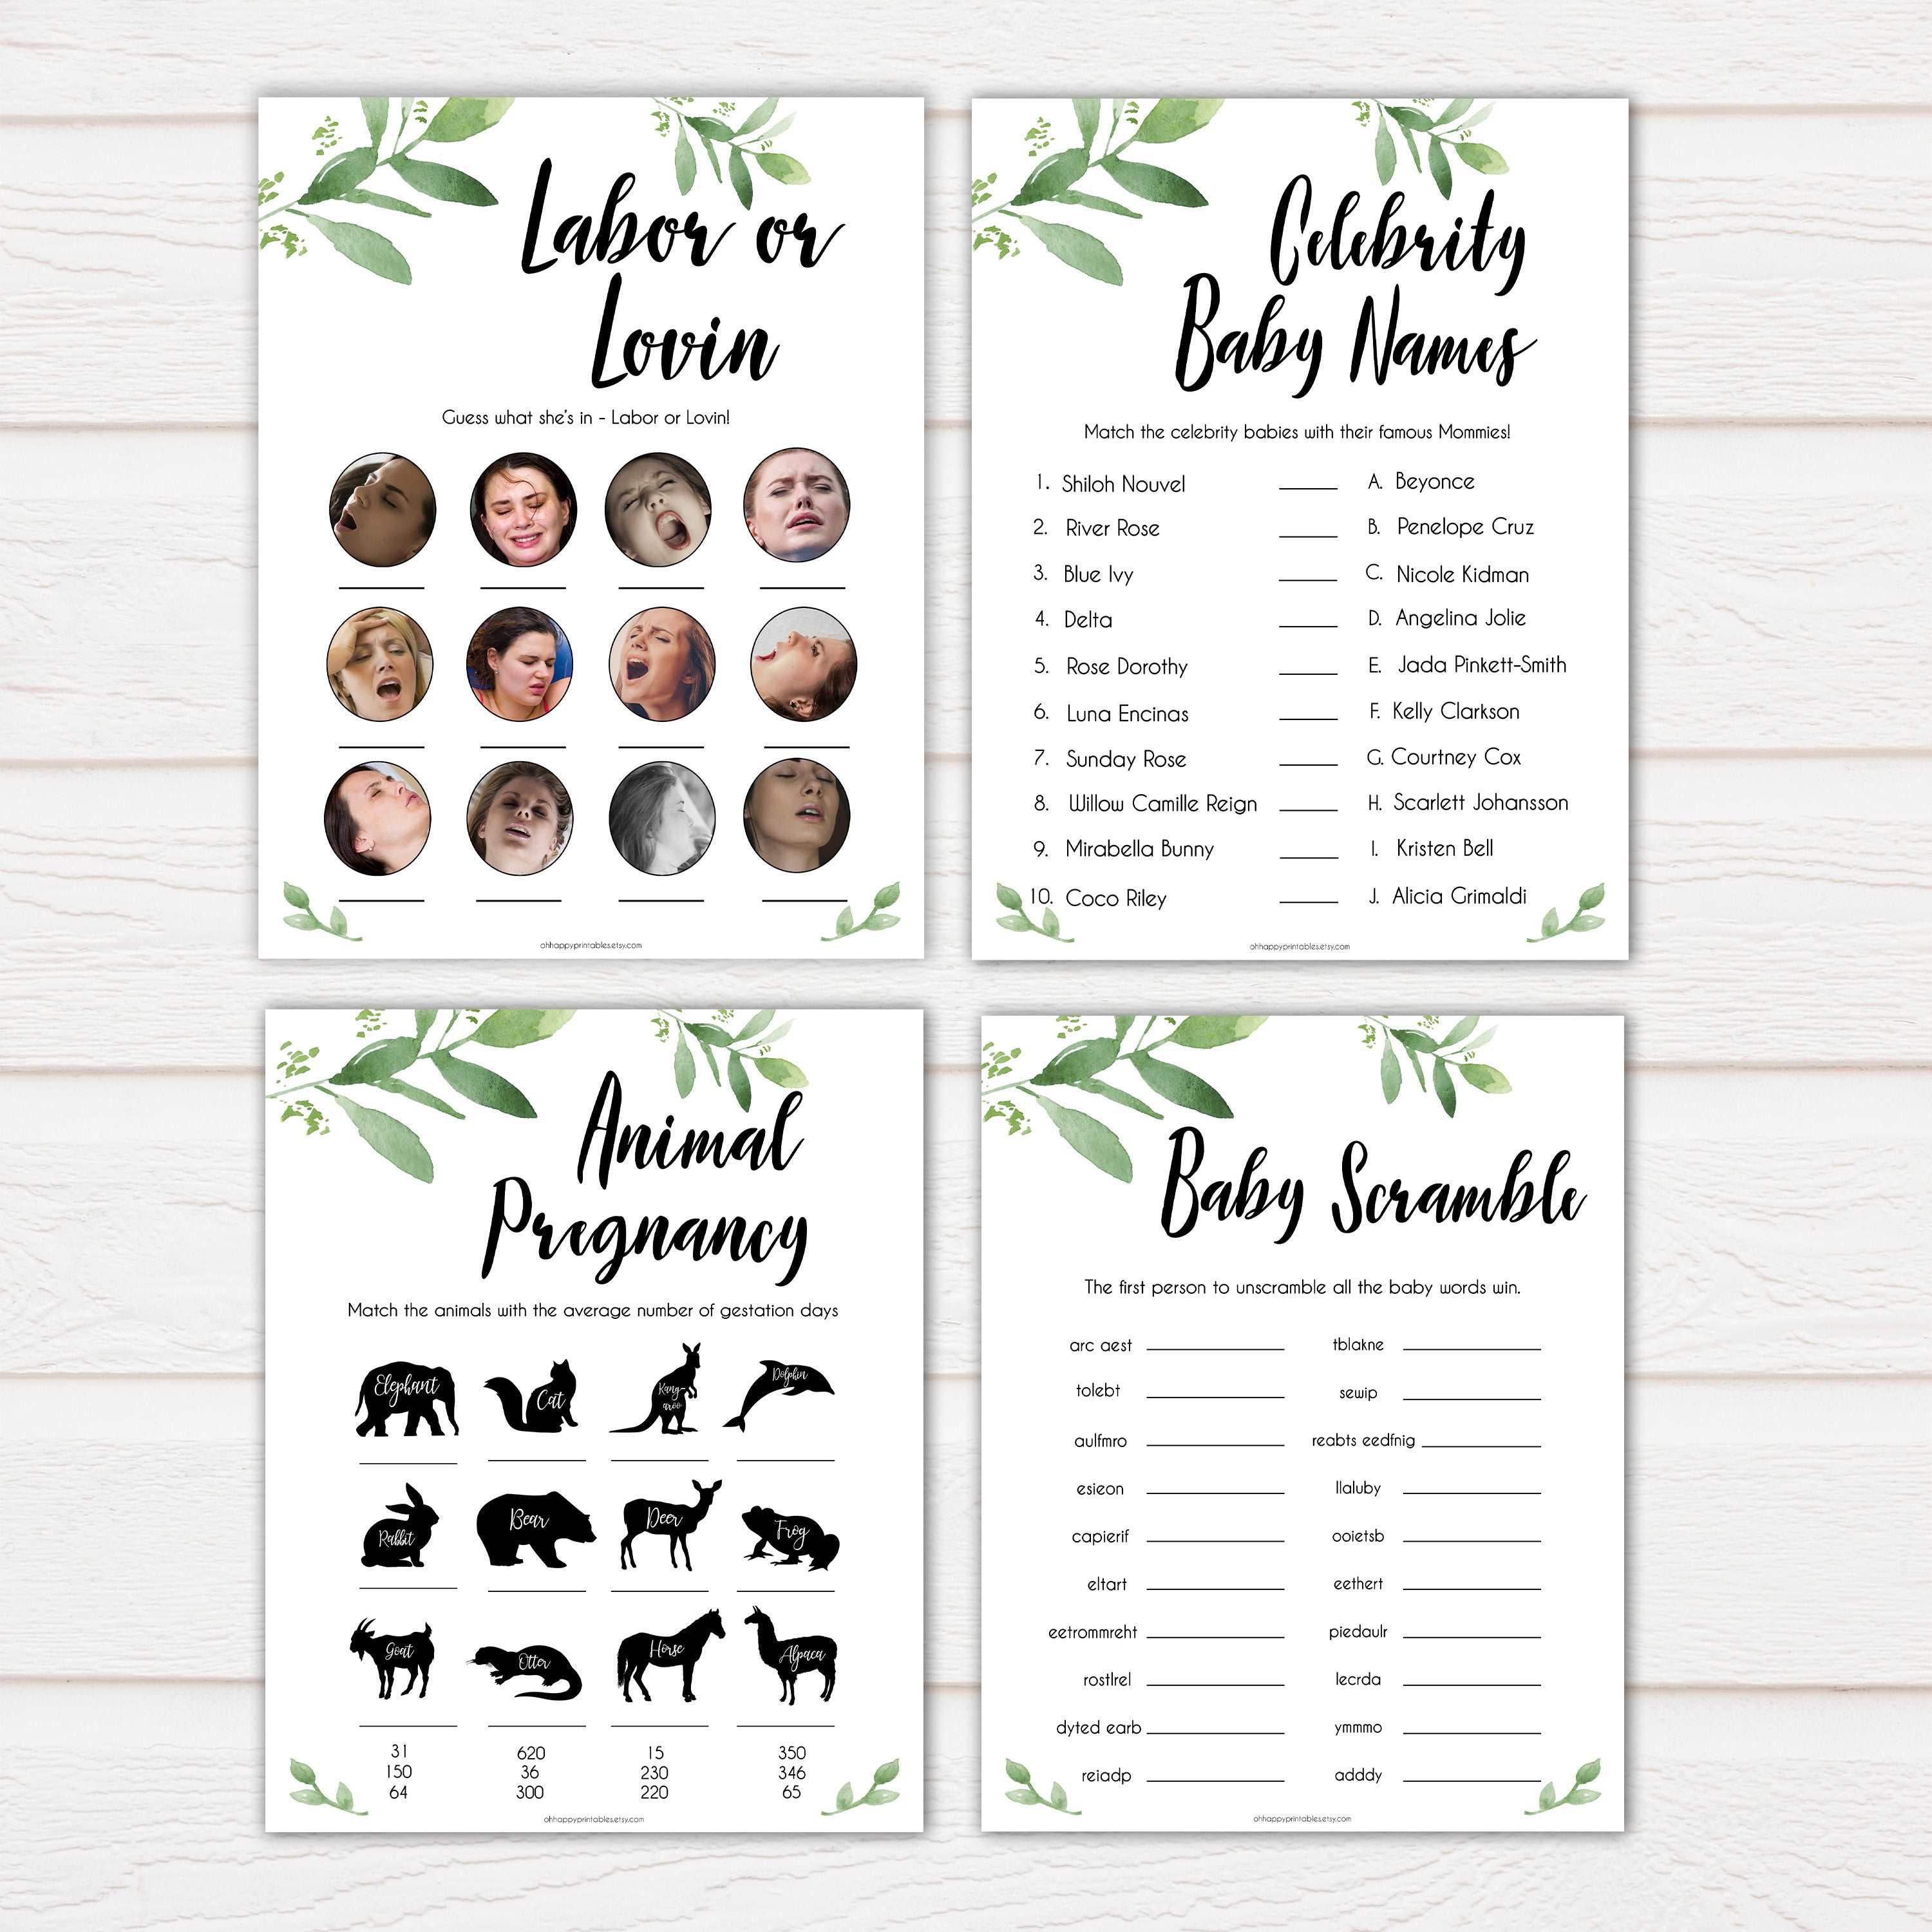 botanical baby shower games, baby shower games bundle, baby games, baby shower ideas, Printable baby games